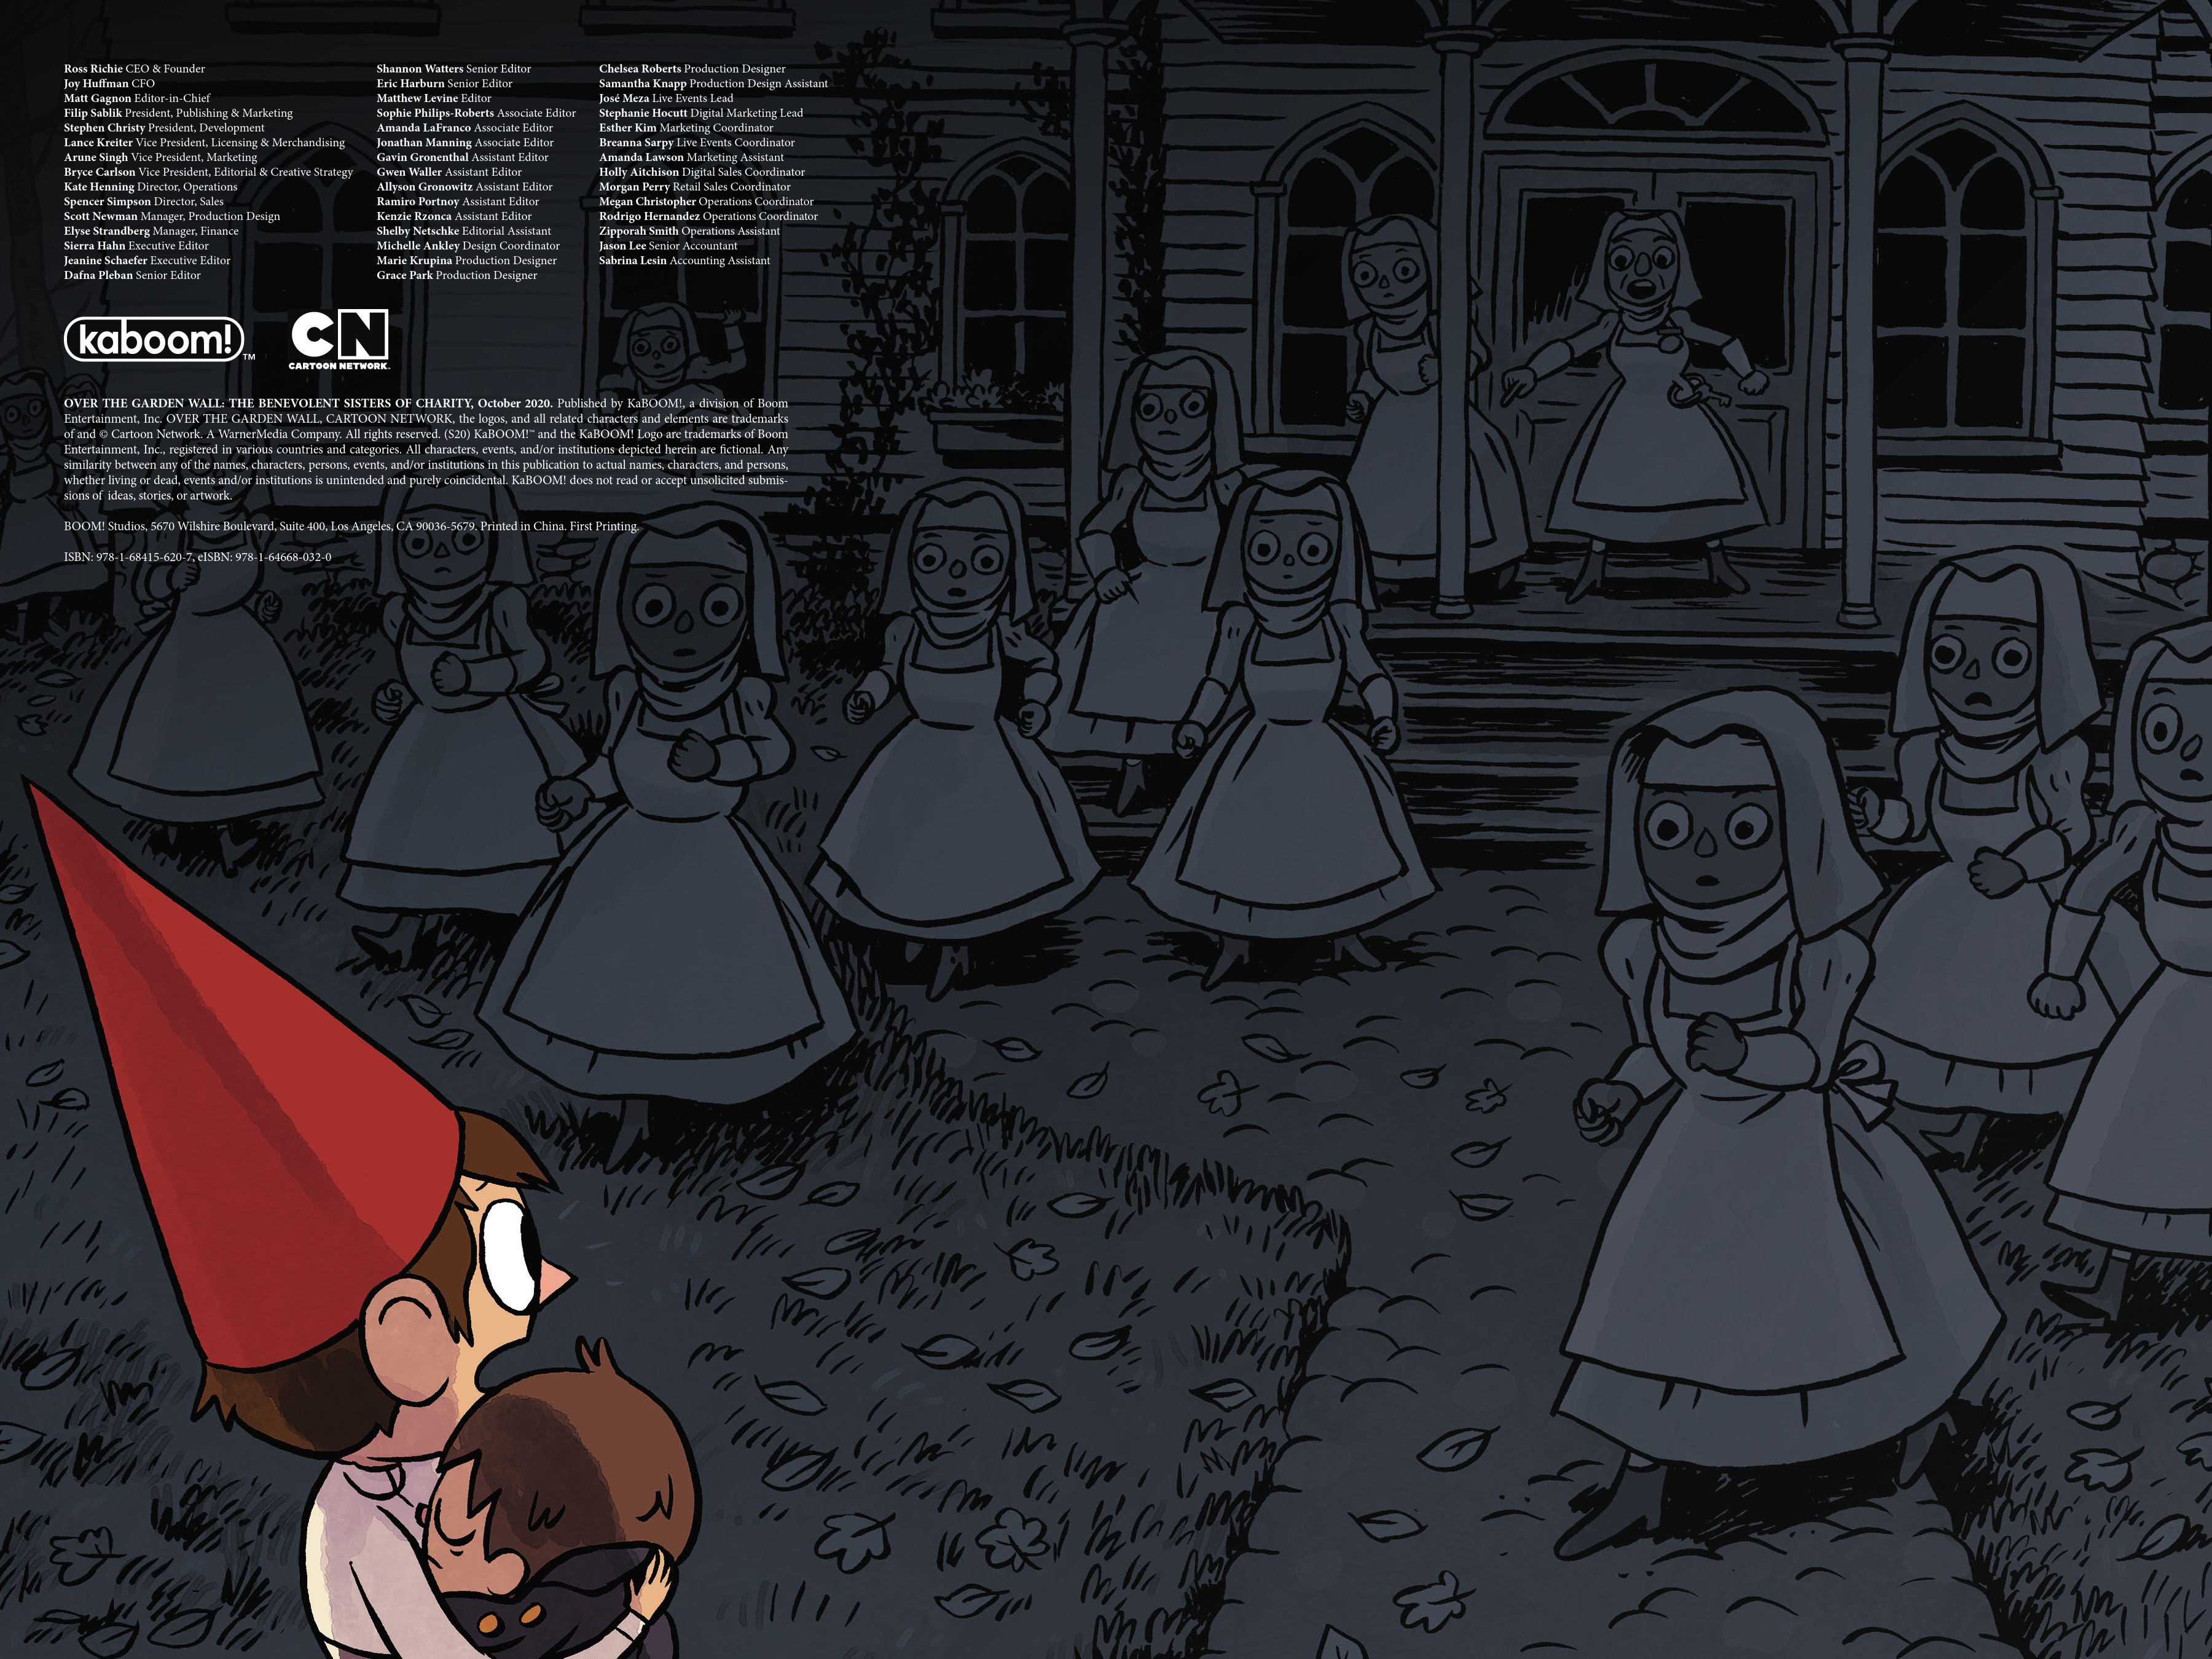 Read online Over the Garden Wall: Benevolent Sisters of Charity comic -  Issue # TPB - 4